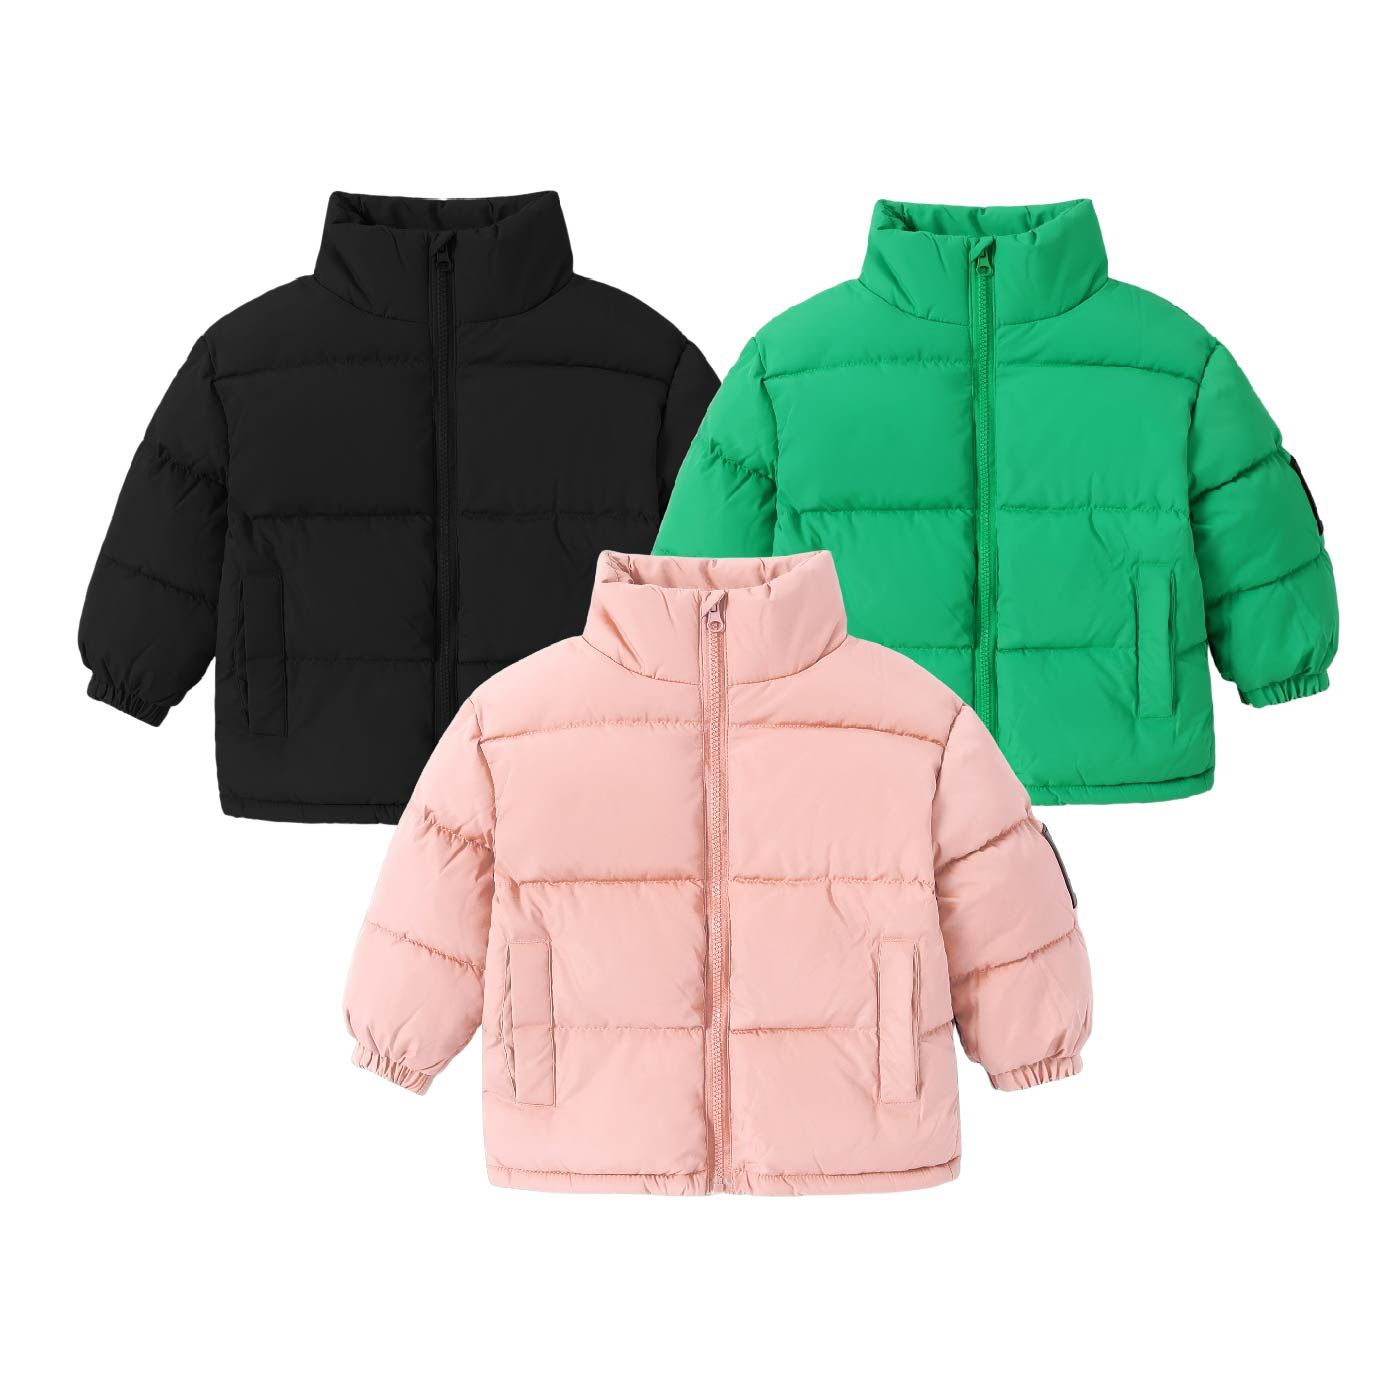 Toddler/Kid Girl/Boy Solid Color Basic Style Cotton Jacket With Zipper And Collar